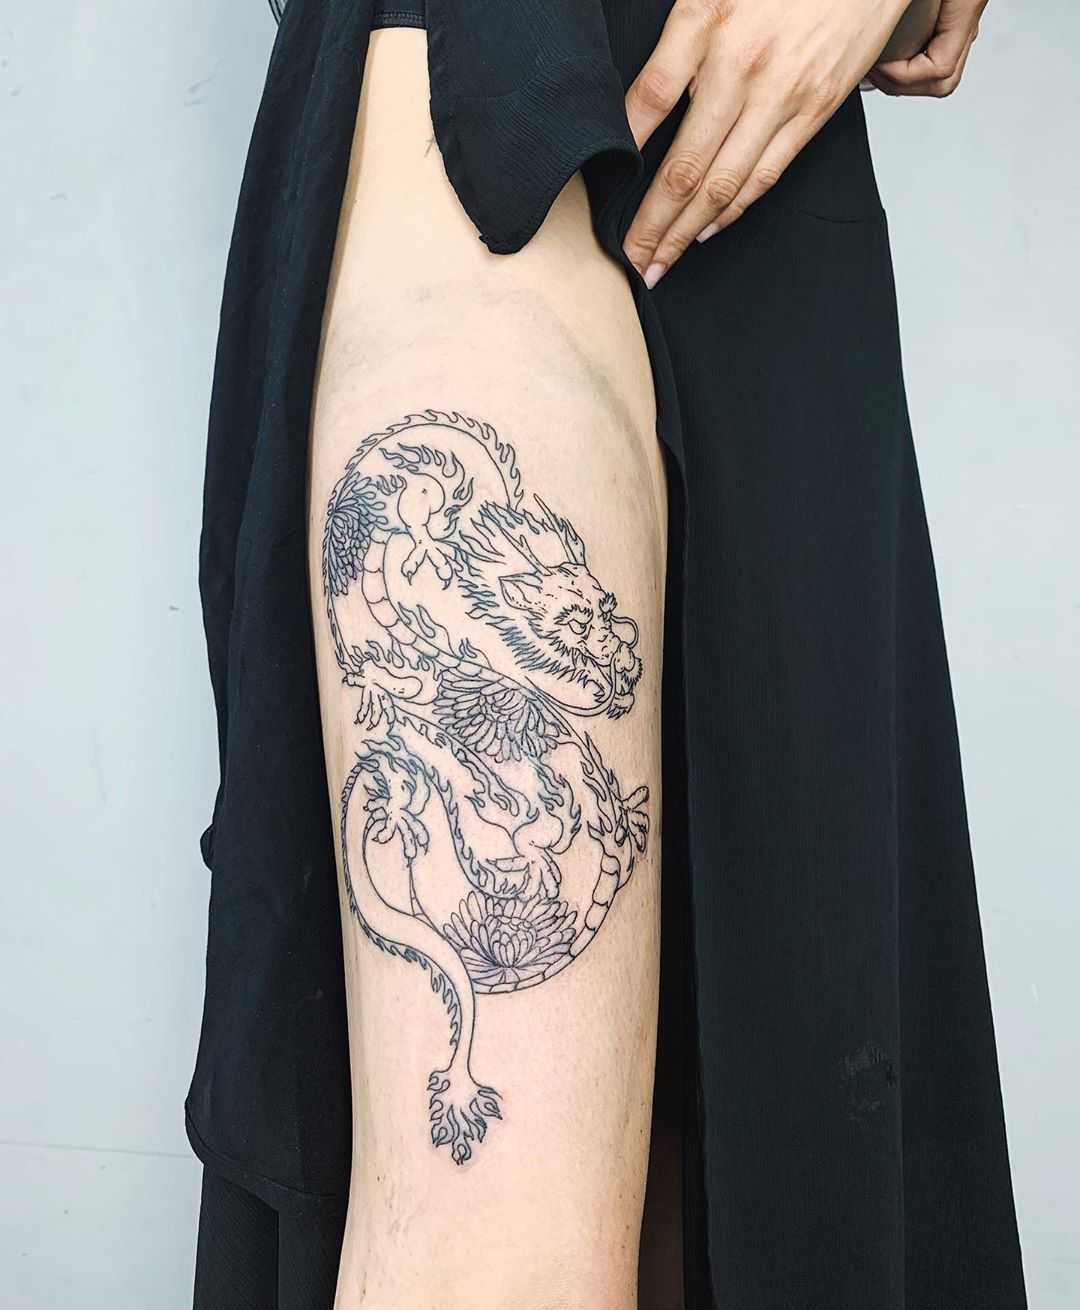 Dragon tattoo by Jay Rose